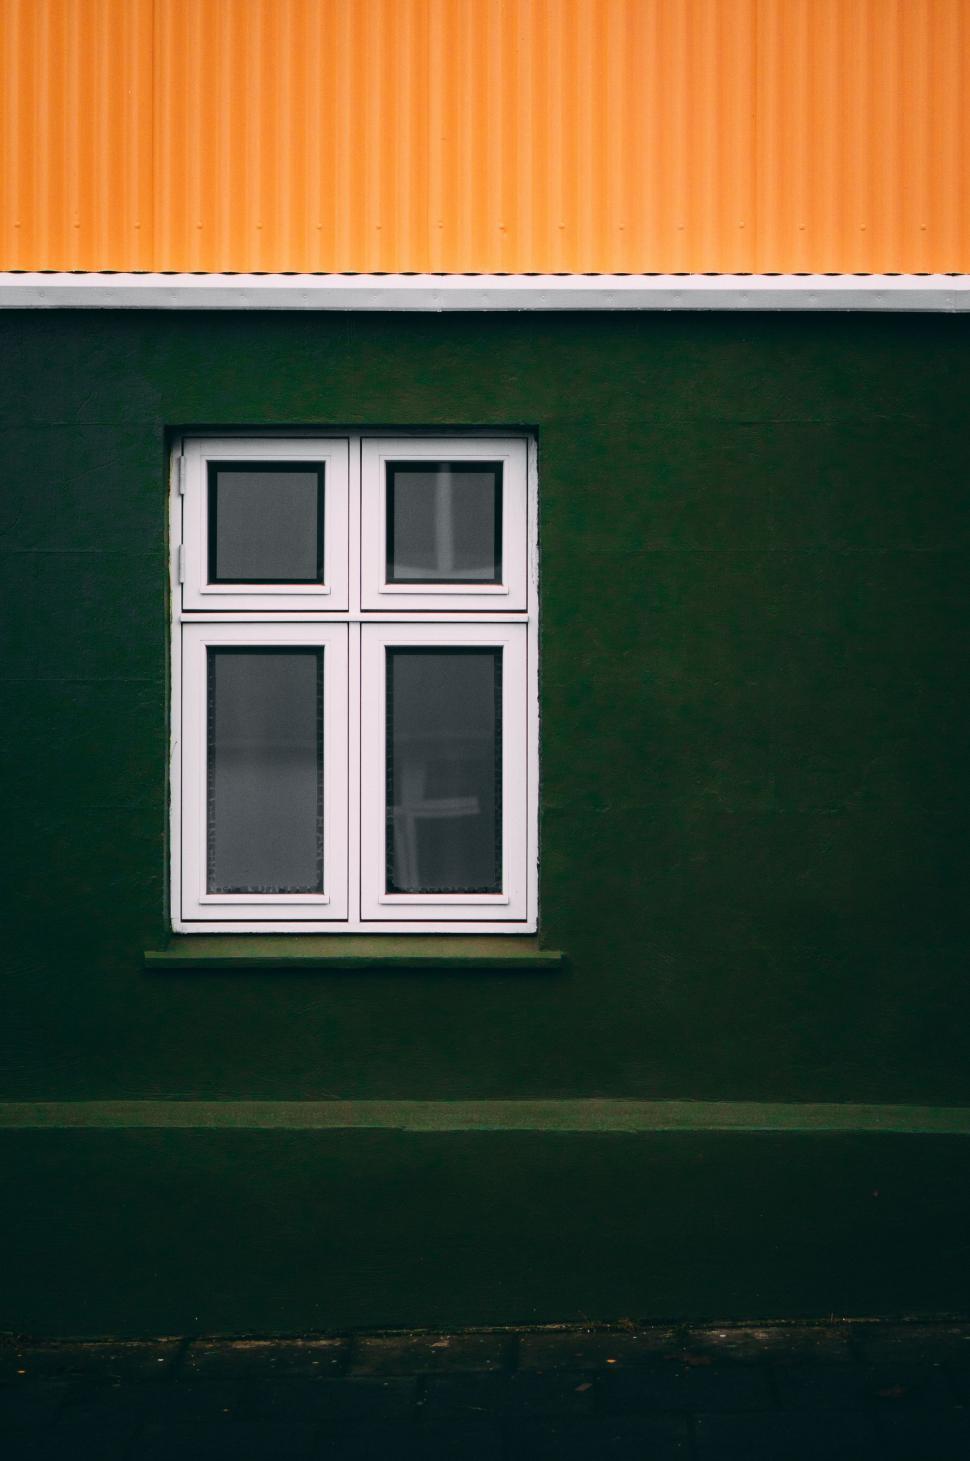 Free Image of Green Building With White Window and Yellow Wall 